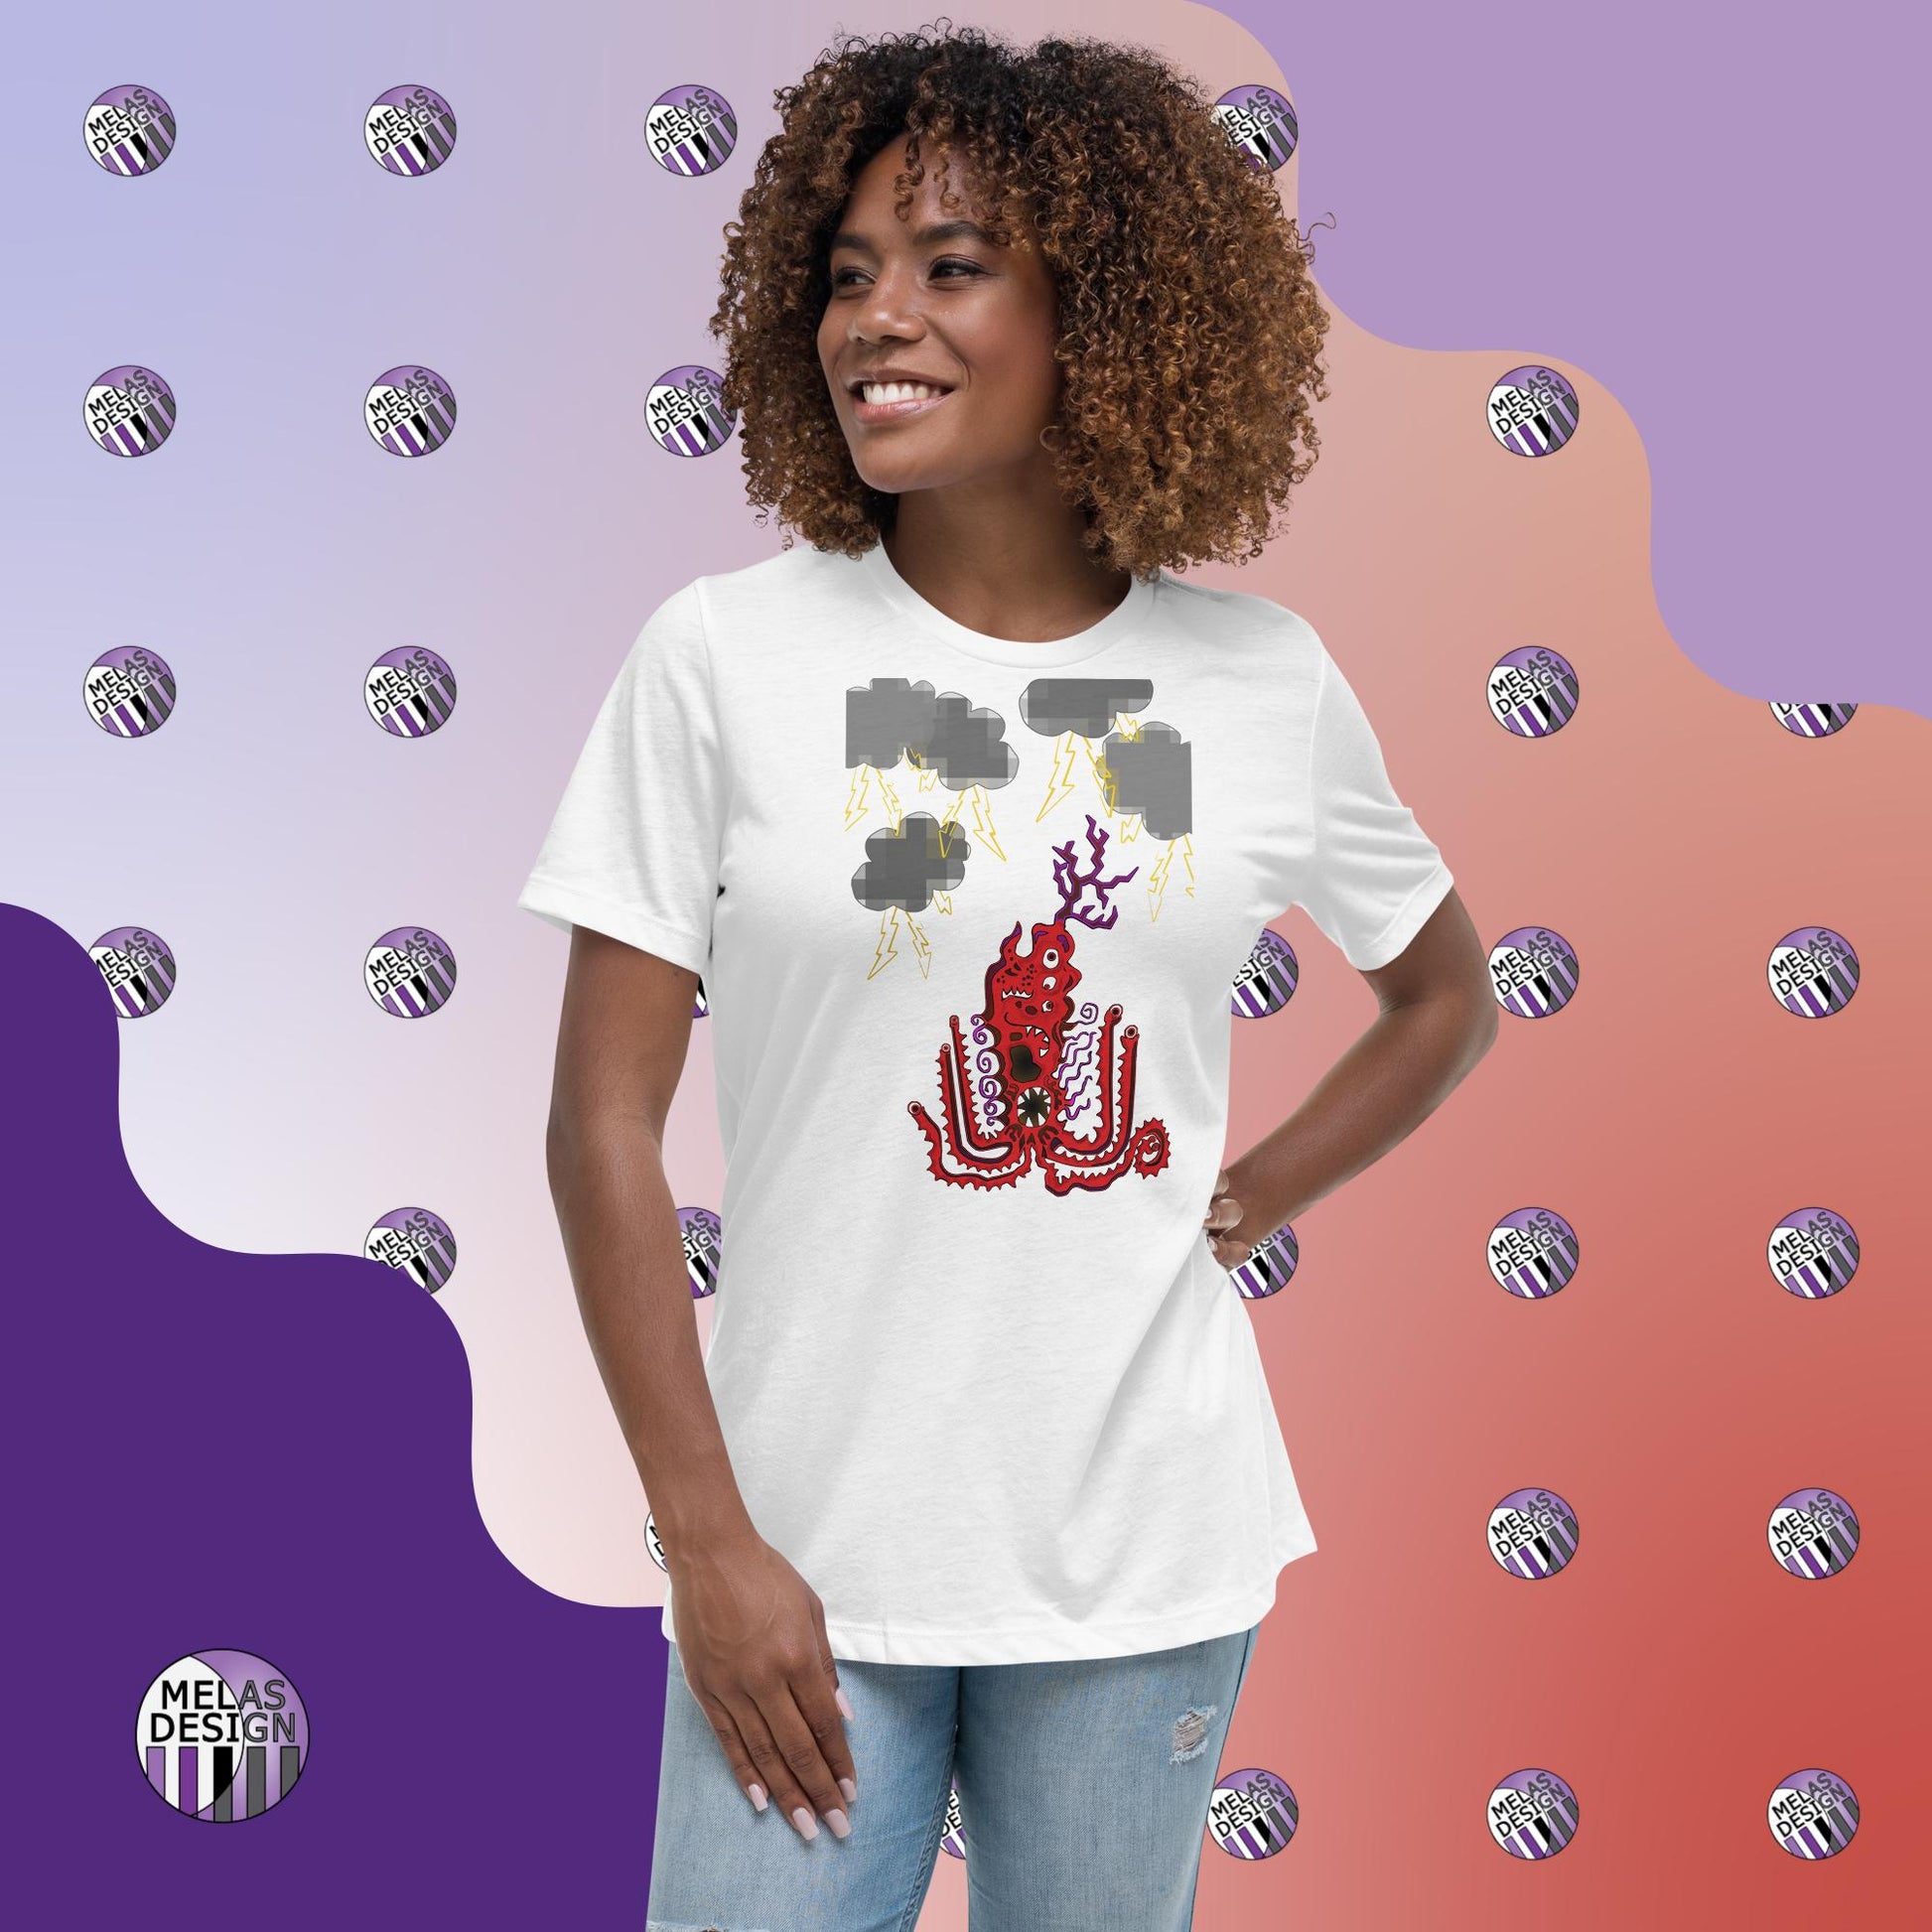 Stormy Red Monster; Cryptid; Women's; Relaxed T-Shirt; Melasdesign; cute; monster; tentacles; many eyes; sharp teeth; storm clouds; cartoon style; anime style; alternative fashion; funny; S-3XL; sold by artist